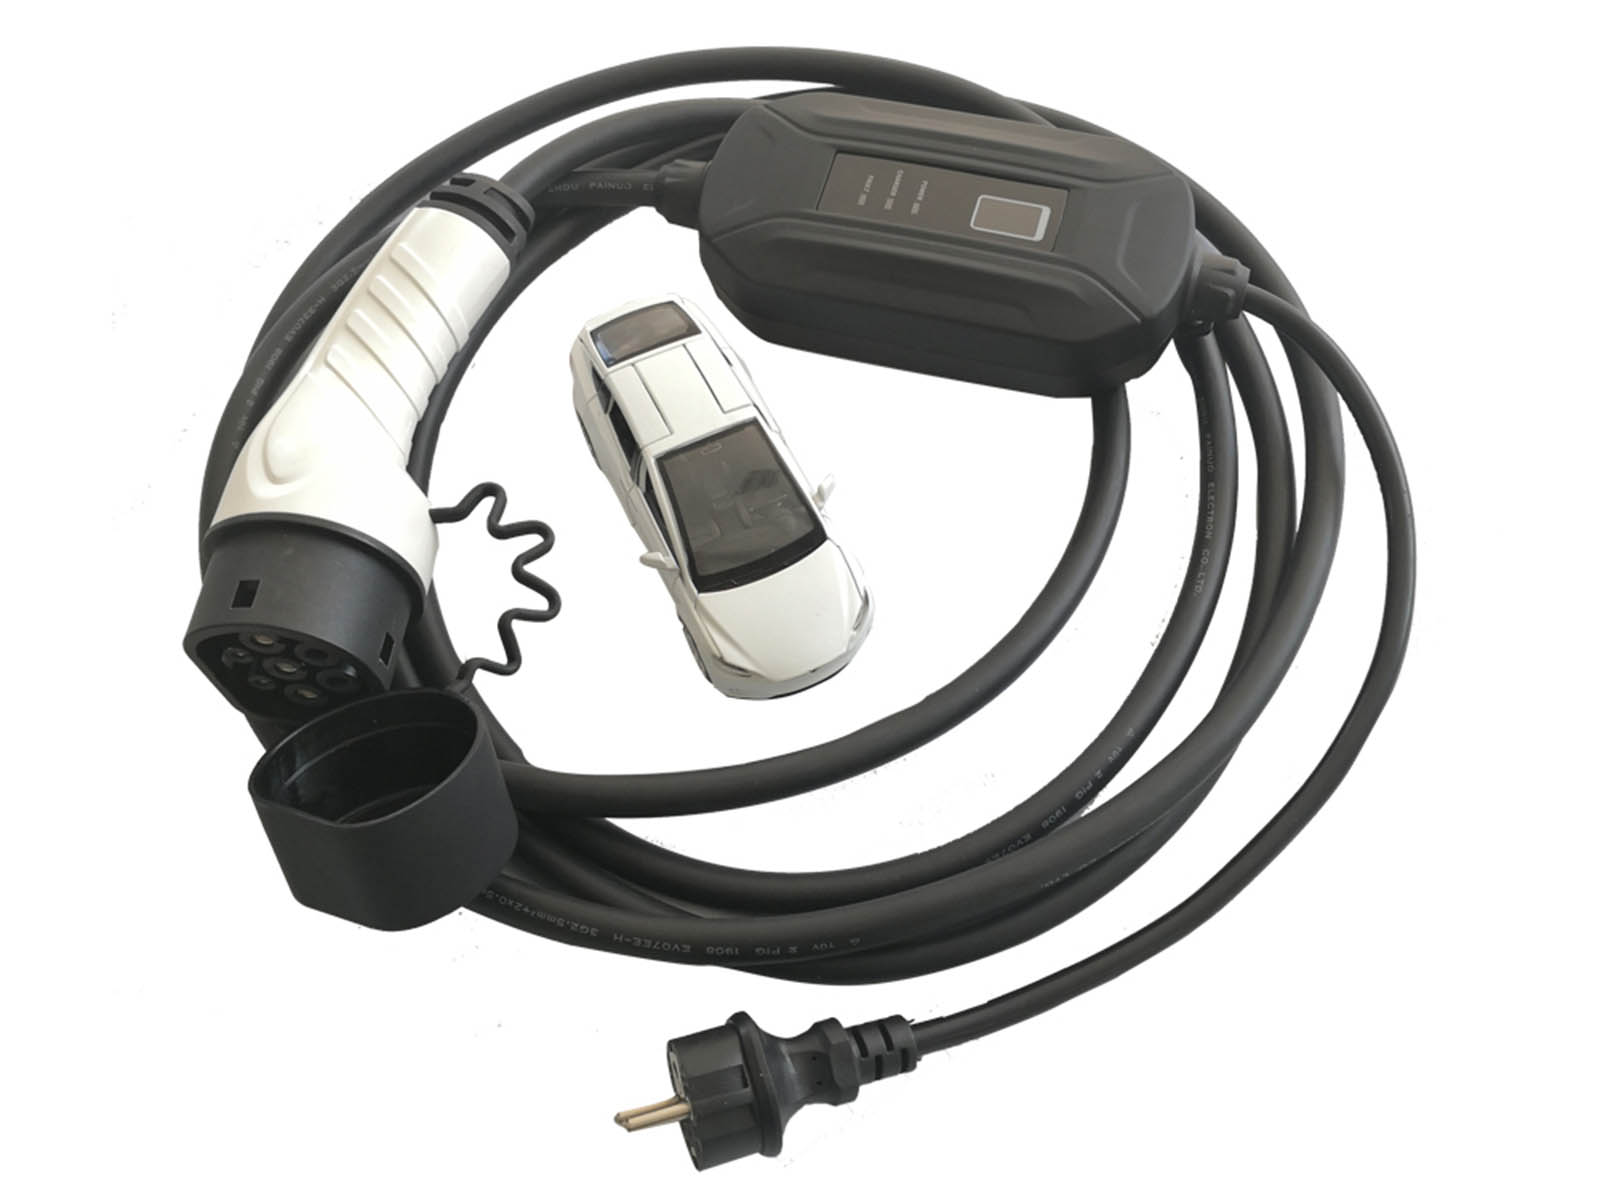 MCEVKELN Type 2 Charging Cable Schuko 3.6 kW - EV Charger Type 2